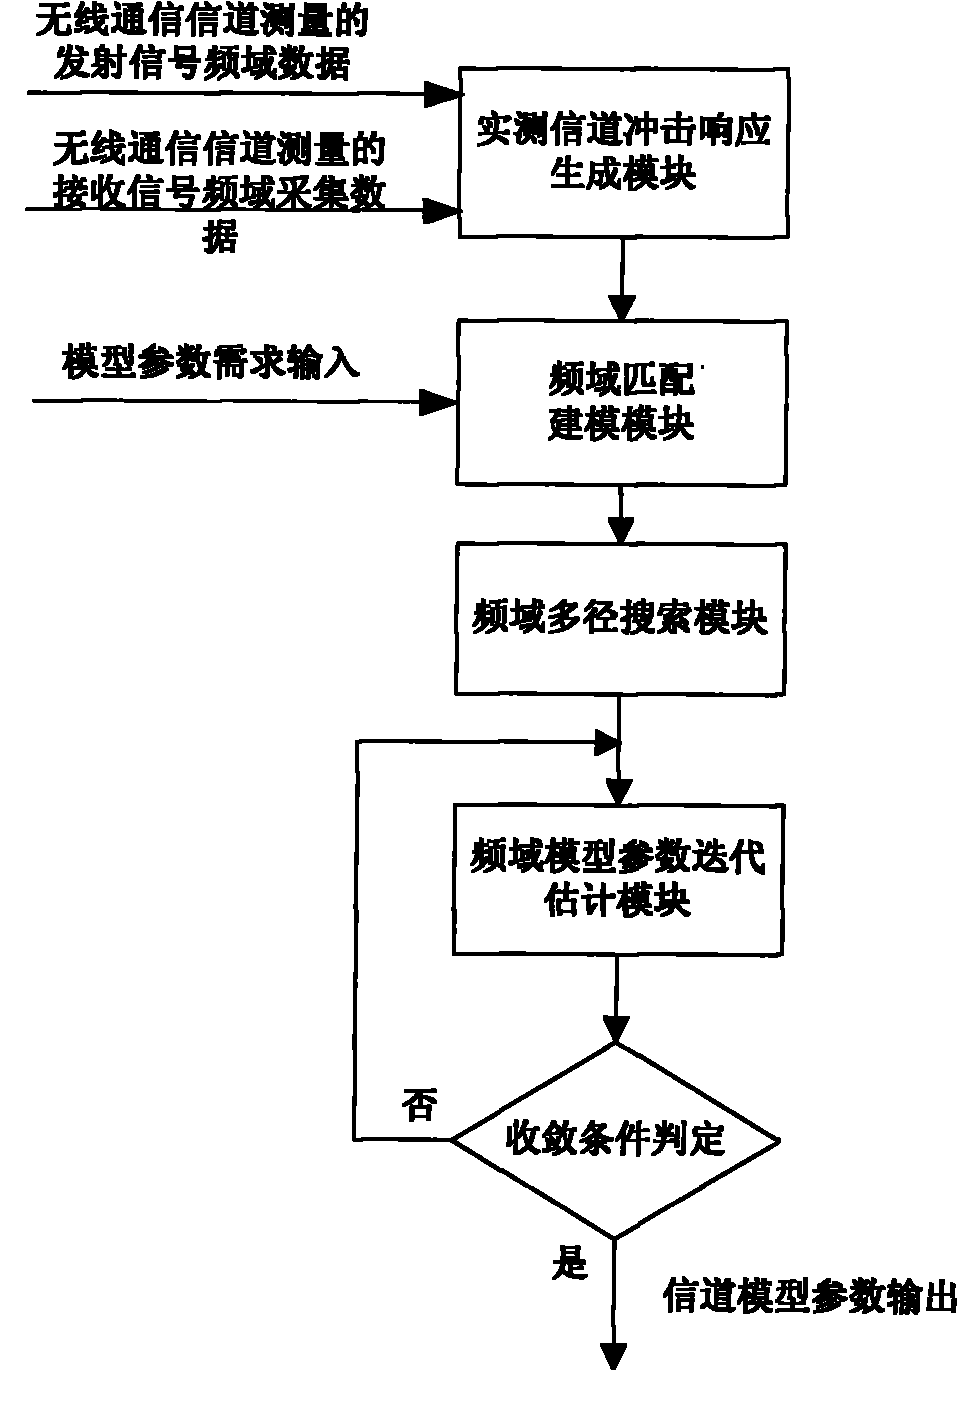 Frequency domain multi-dimensional parameterized model of broadband wireless communication channel and modeling method